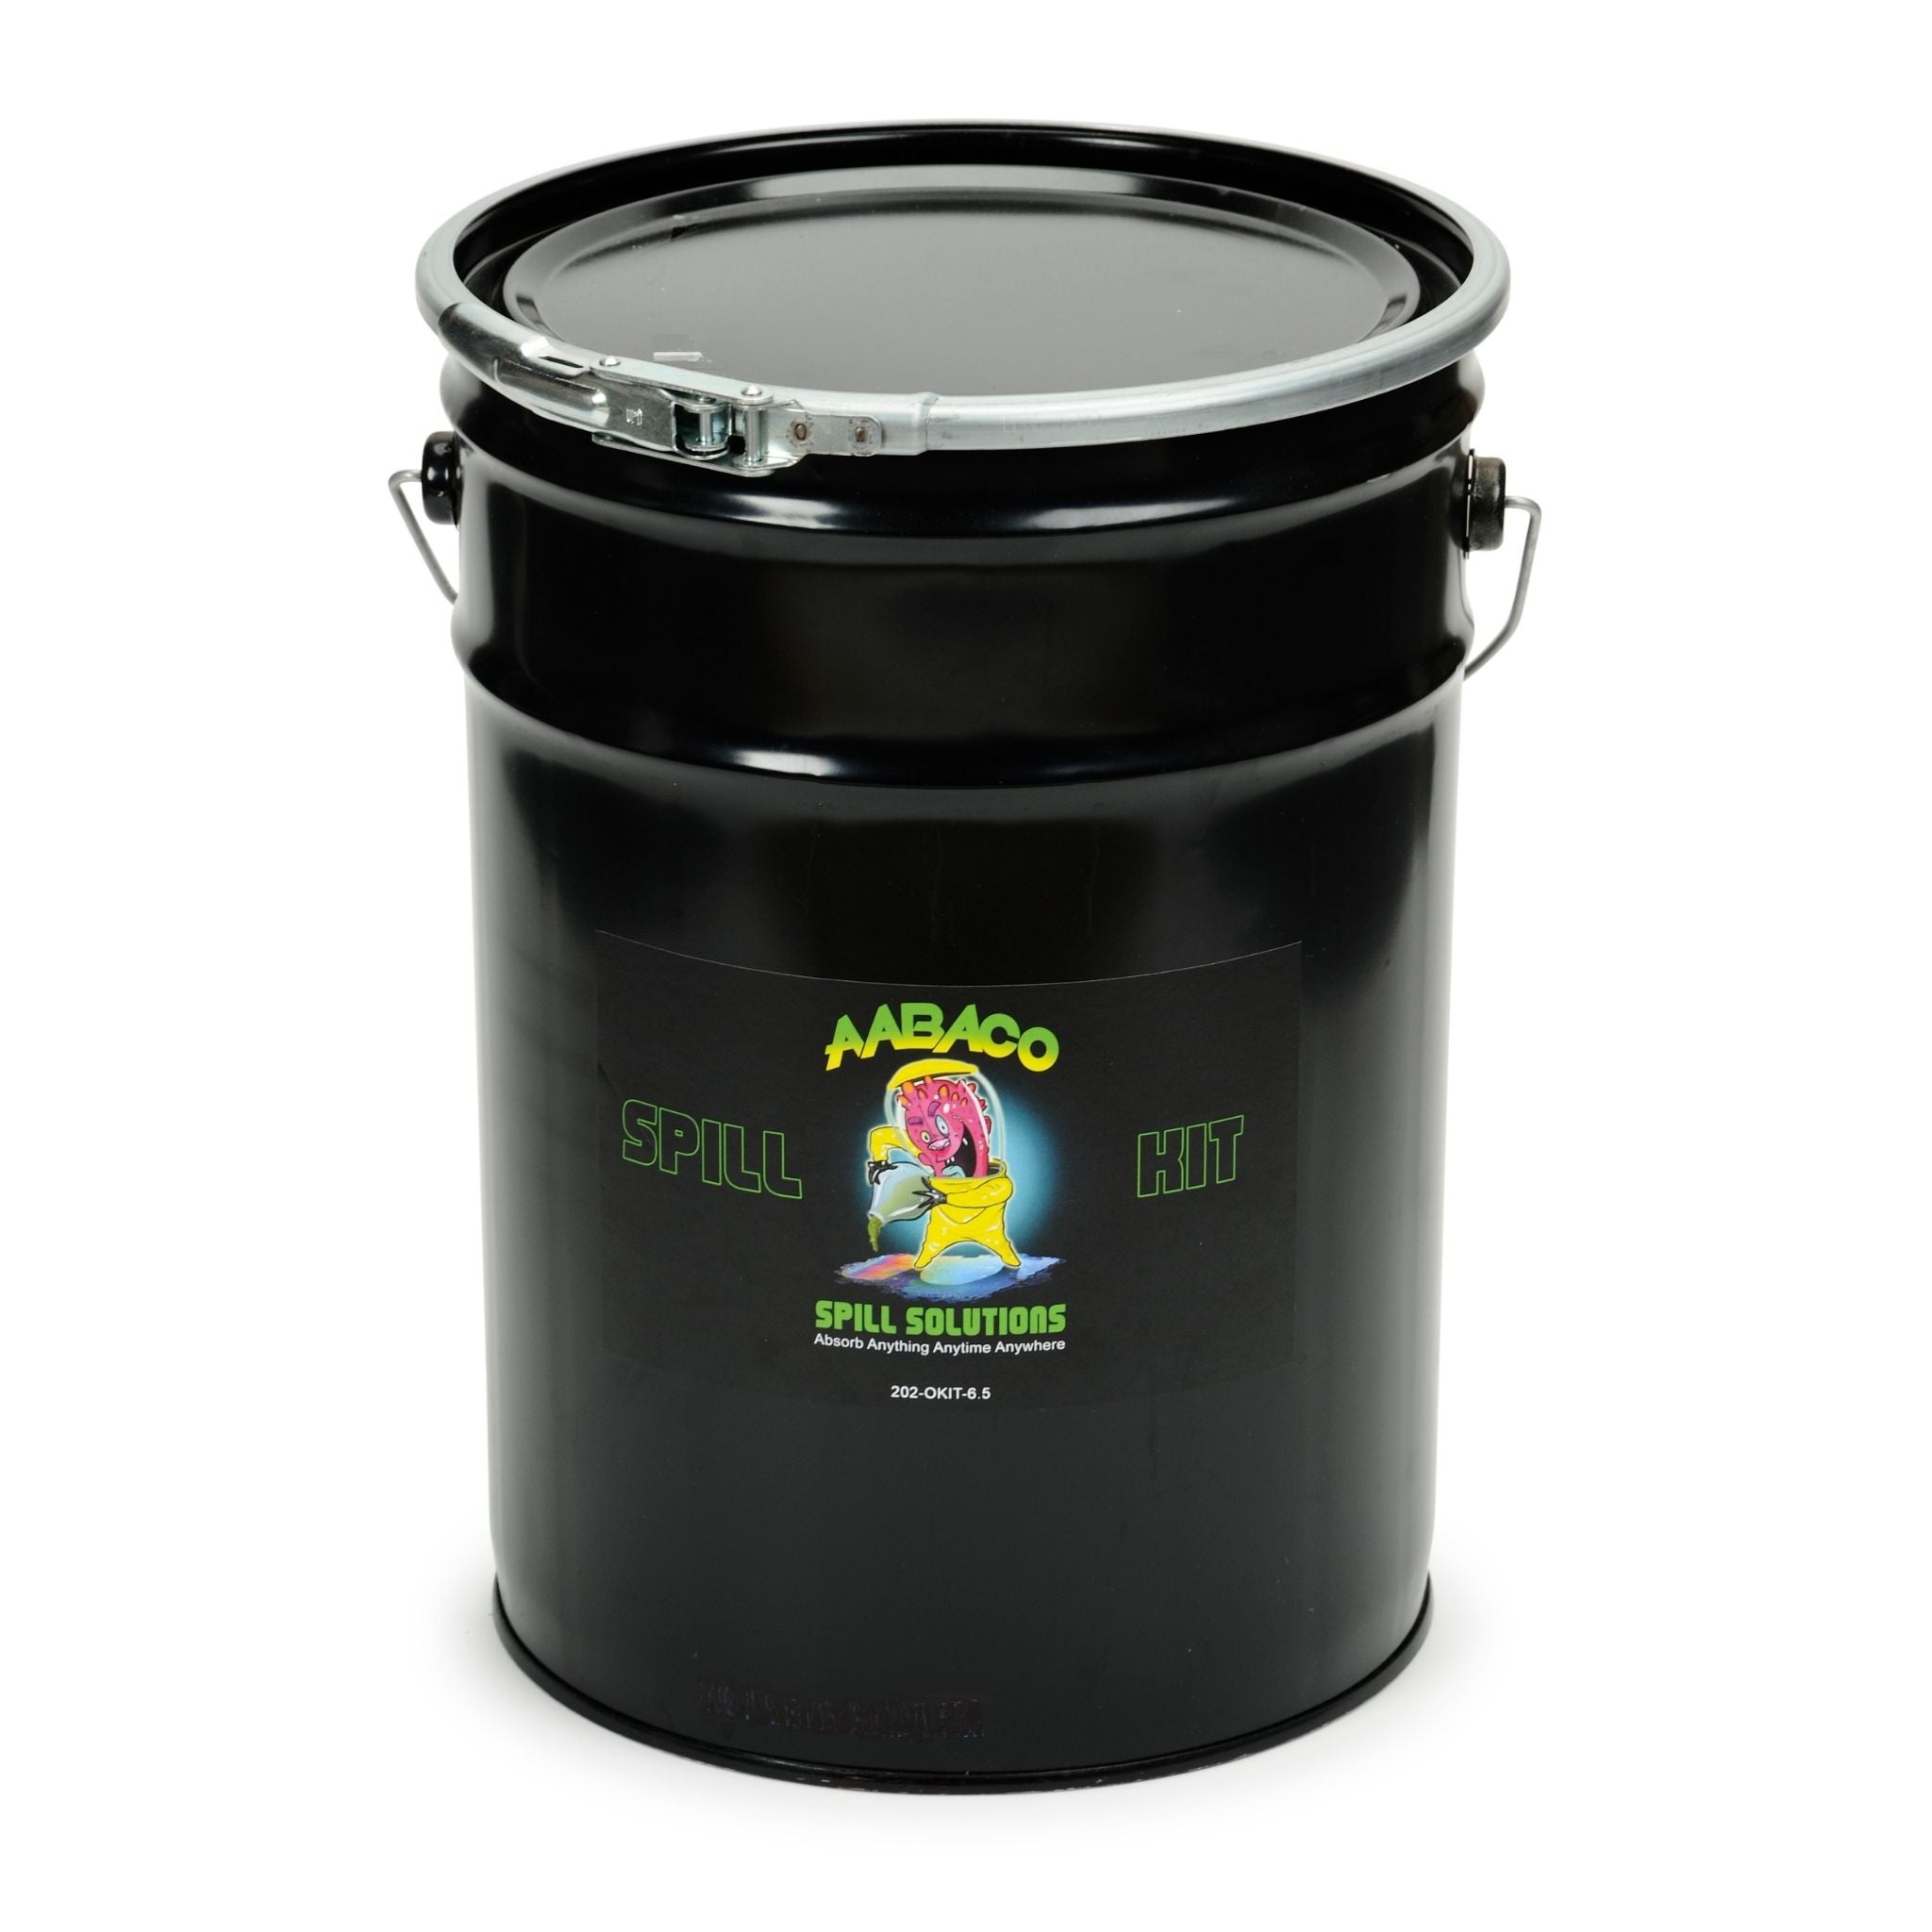 AABACO OIL ONLY SPILL KIT IN STEEL BUCKET  – 6.5 GALLONS